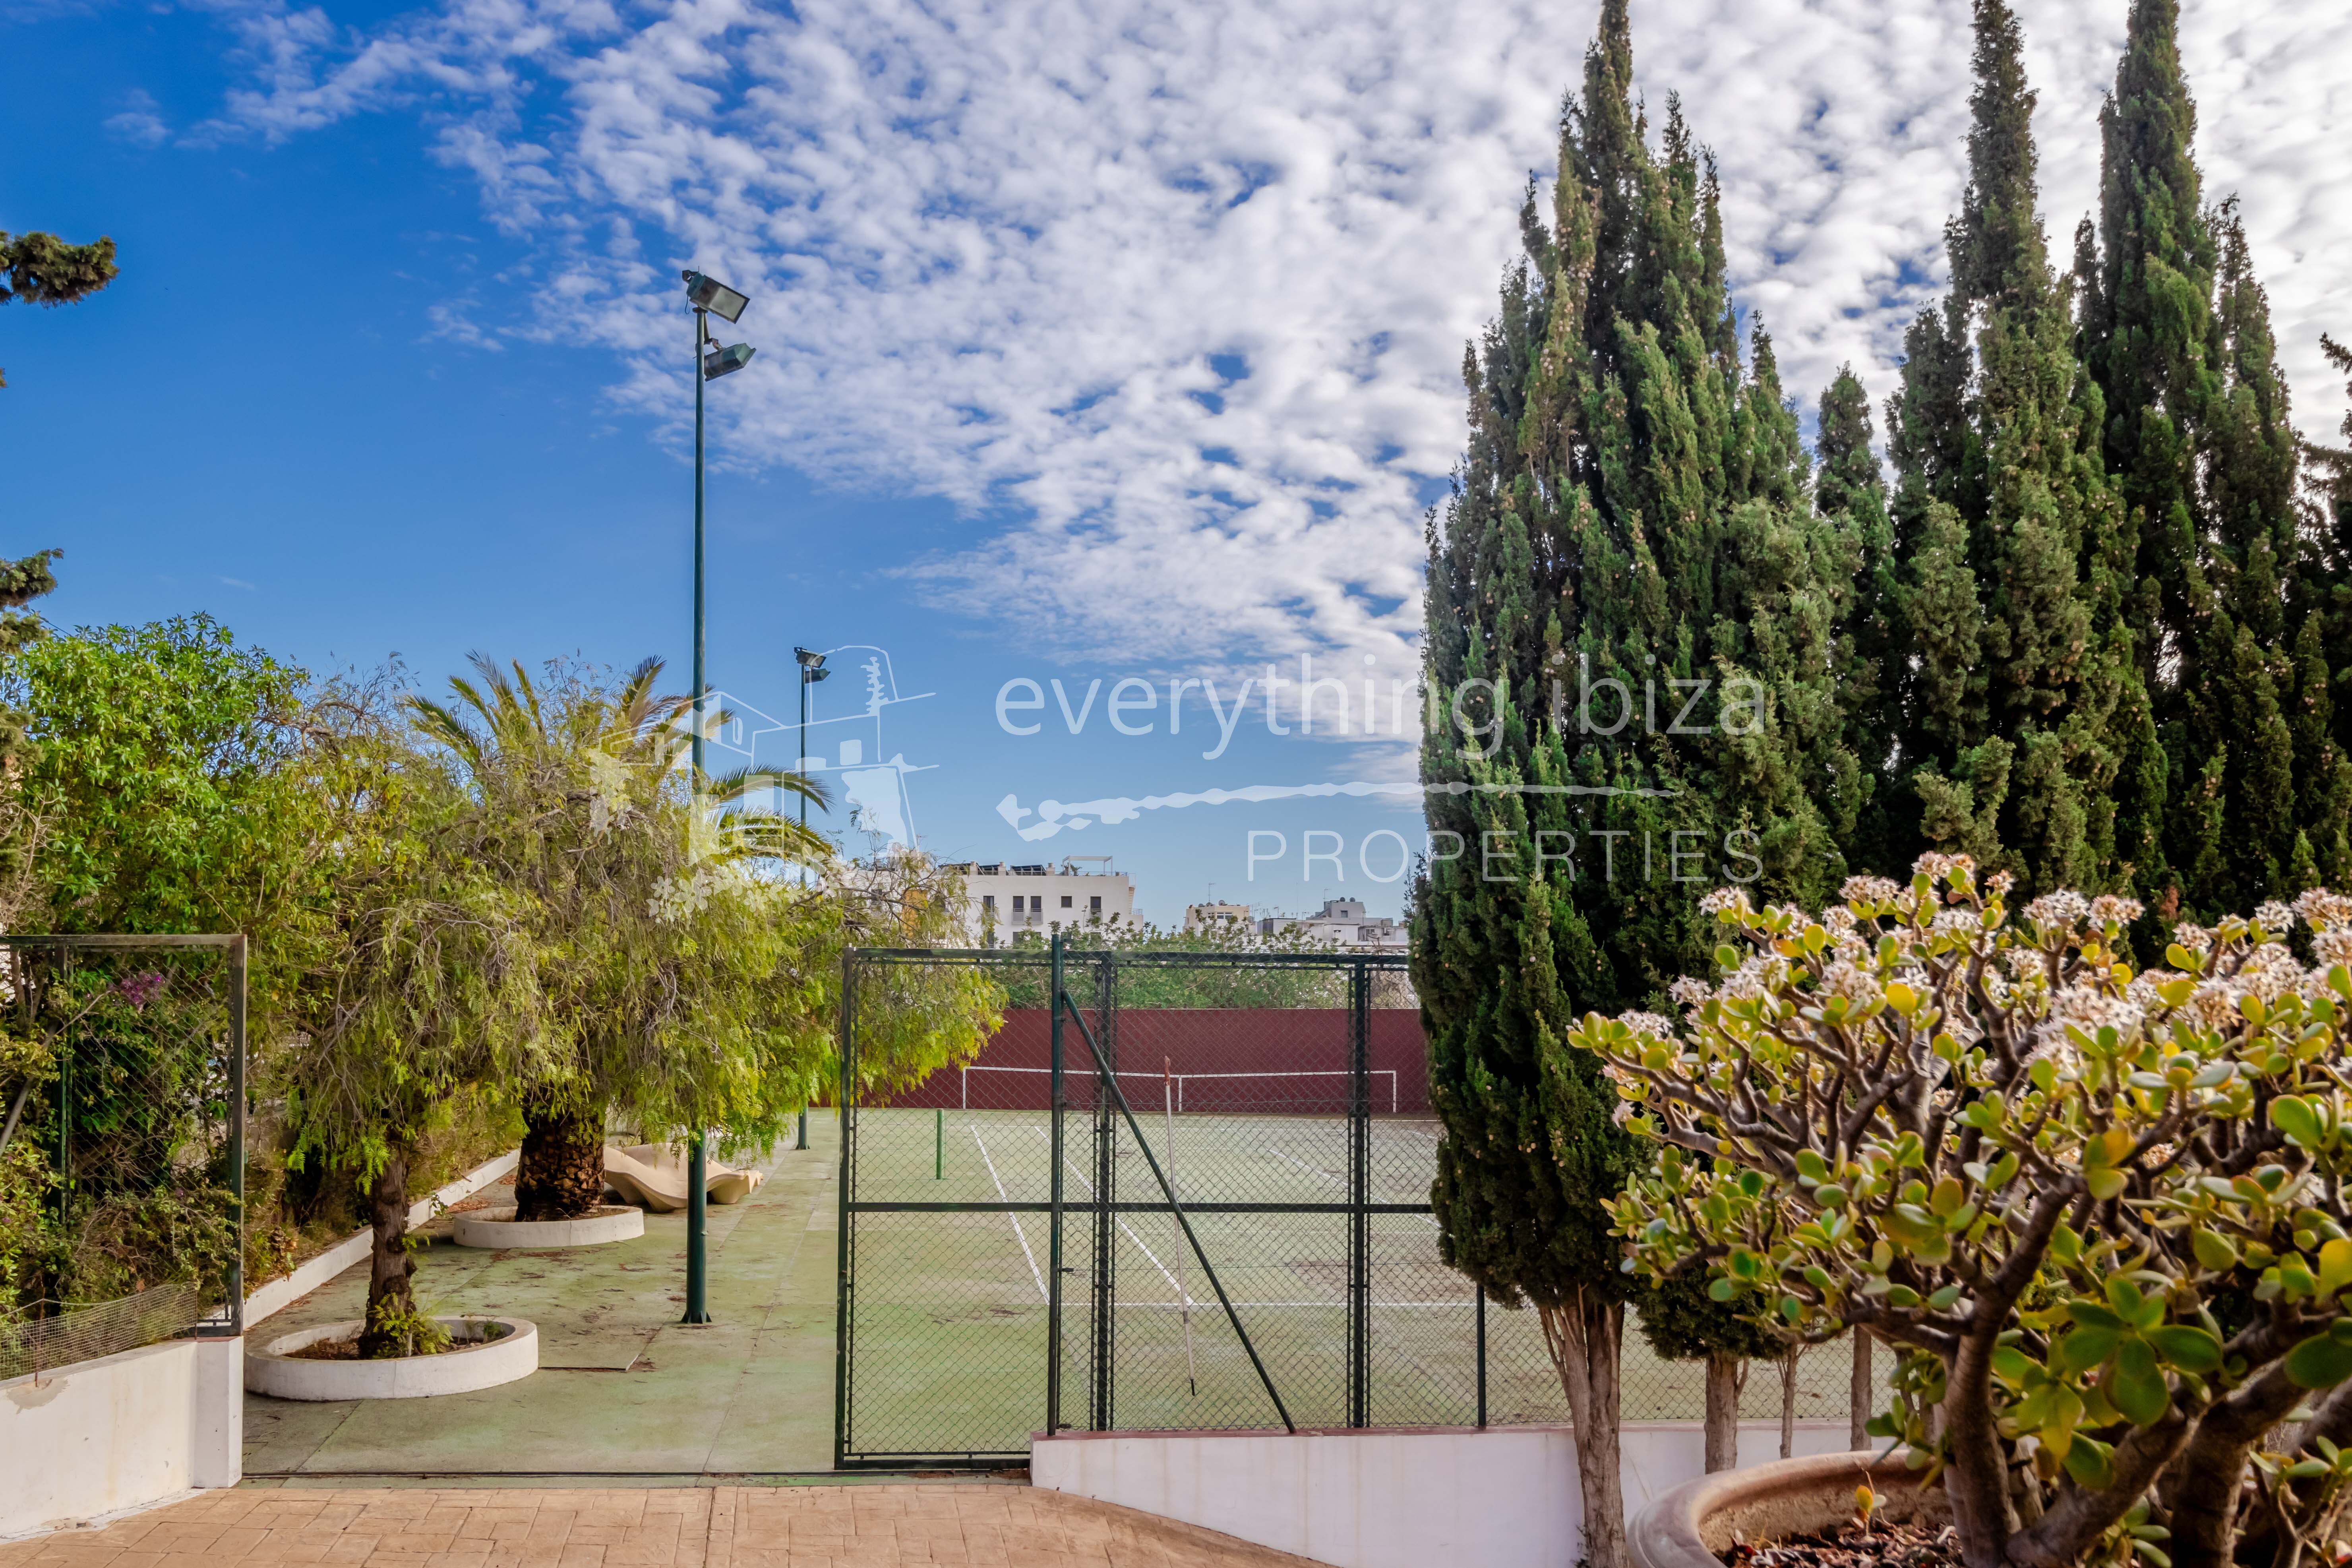 Quality Finca with Tennis Court and Huge Plot of Land for Project Near Talamanca, ref, 1672, for sale in Ibiza by everything ibiza Properties